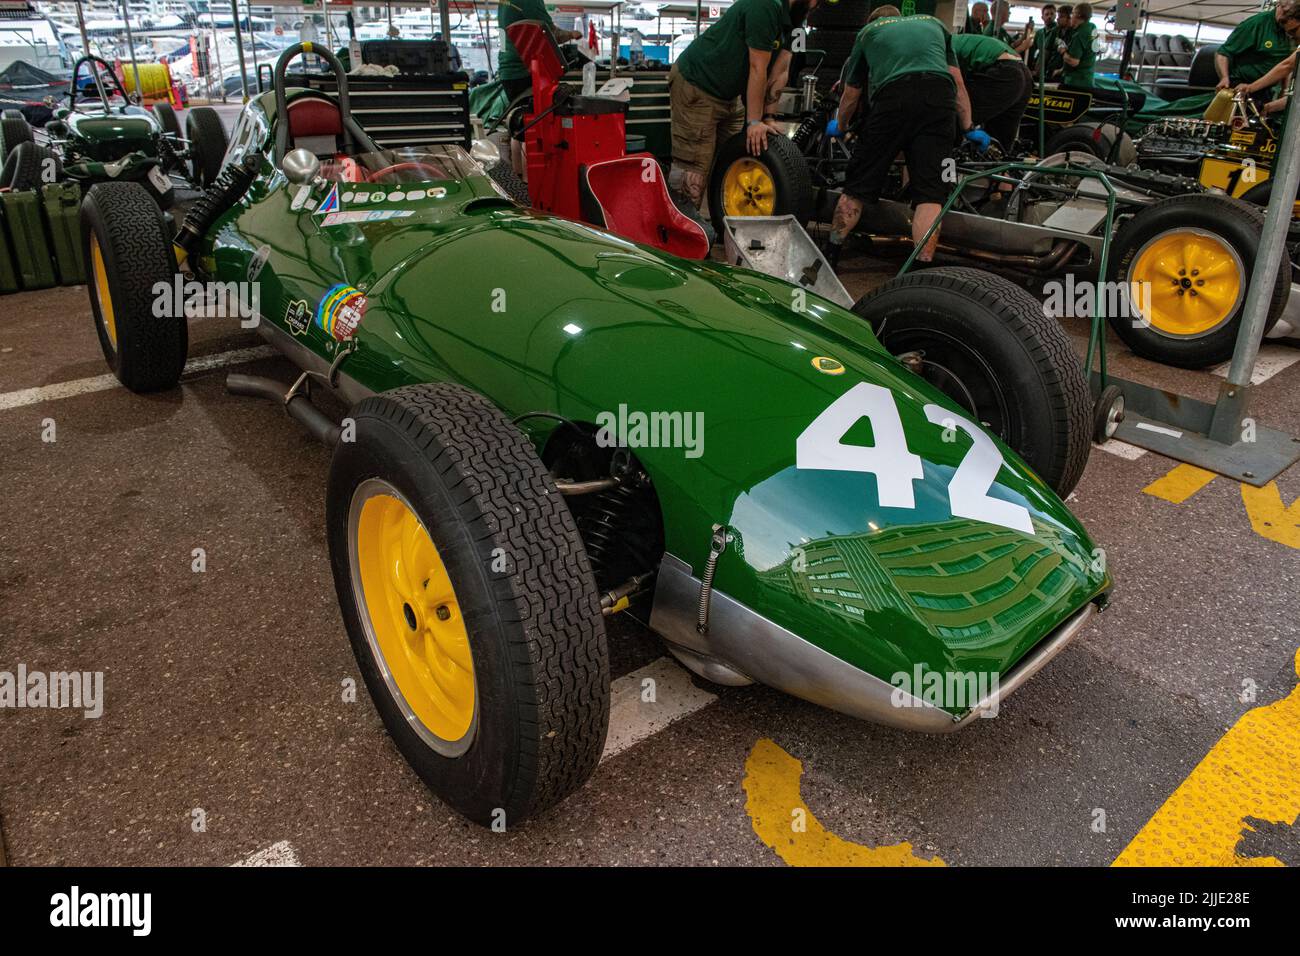 The famous green and yellow Lotus Formula 1 cars n the pits of the historic Grand Prix in Monaco Stock Photo